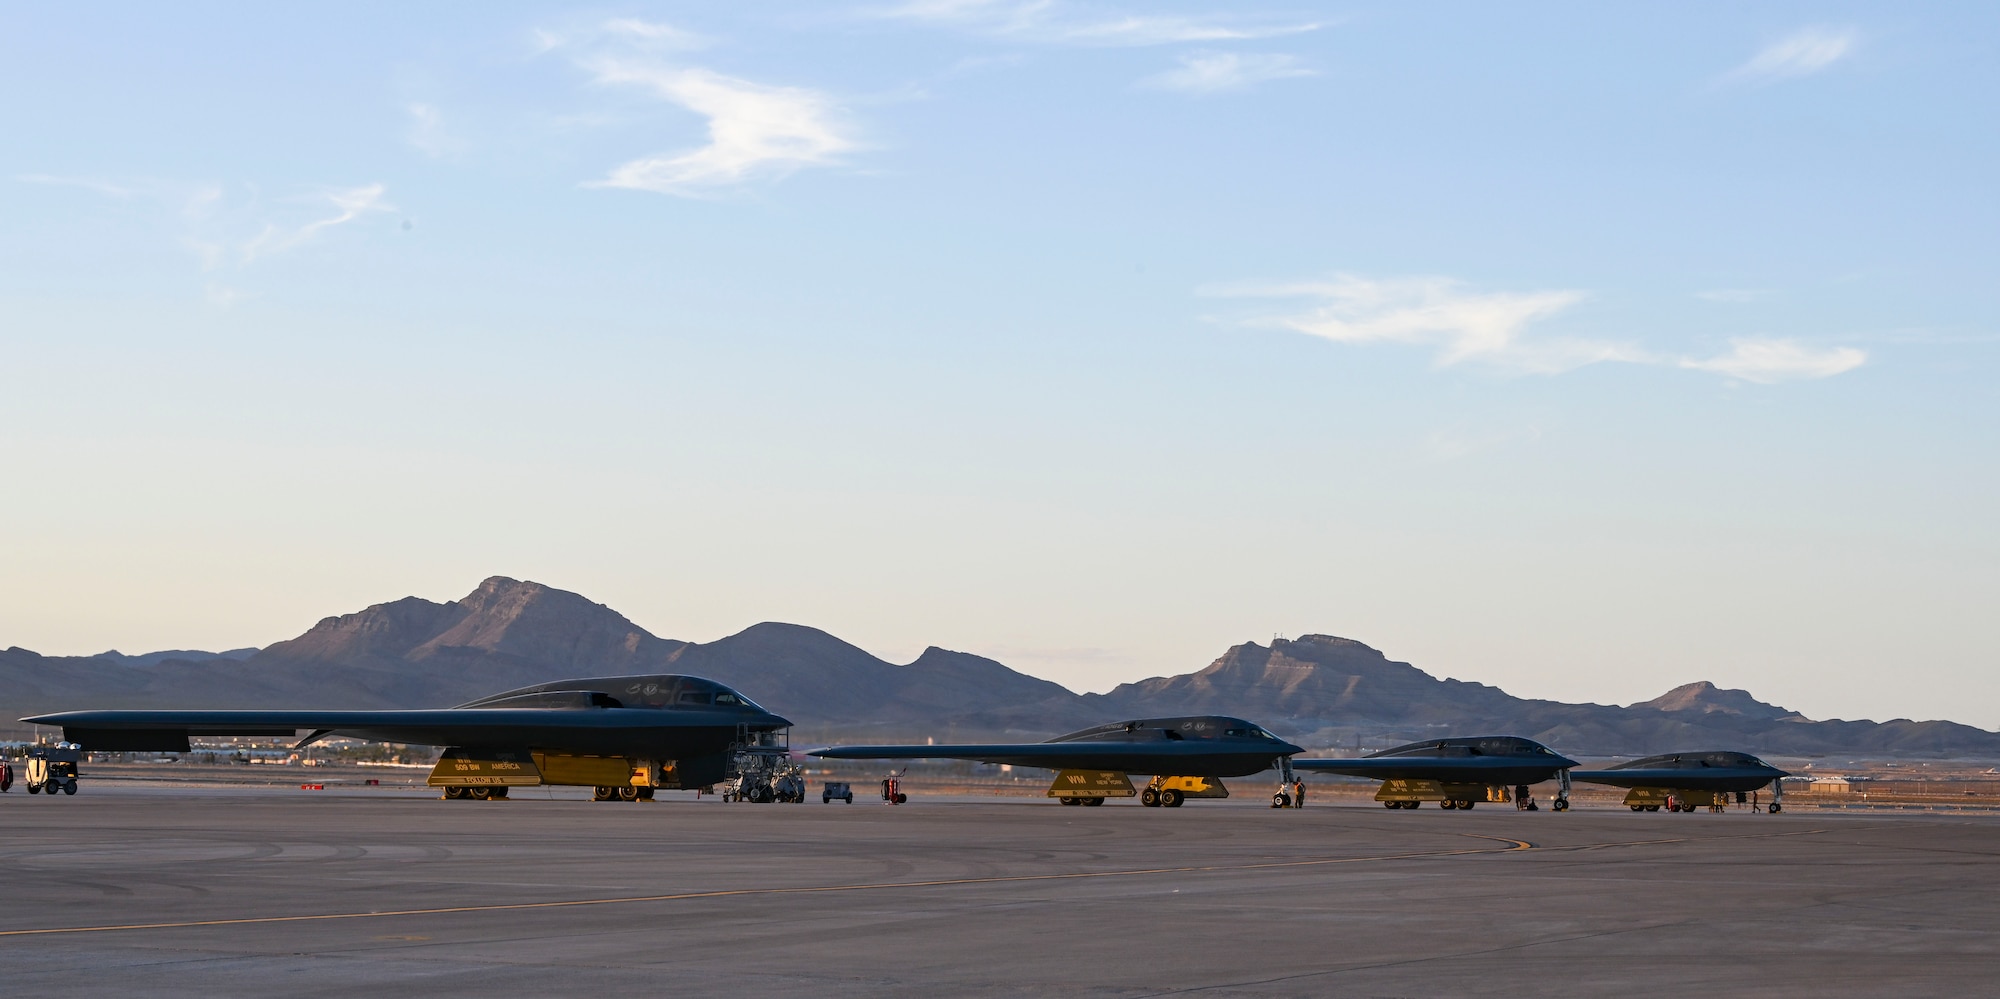 Four U.S. Air Force B-2 Spirit stealth bomber from 509th Bomb Wing, Whiteman Air Force Base, Missouri, sit on the flight line at Nellis Air Force Base, Nevada, June 6, 2022. The 325th Weapons School in Las Vegas, Nevada trains tactical experts and leaders to control and exploit air, space and cyberspace on behalf of the joint force. Every six months, approximately 130 weapons officers and enlisted specialists graduate as tactical system experts, weapons instructors and leaders of Airmen. (U.S. Air Force photo by Staff Sgt. Alexandria Lee)